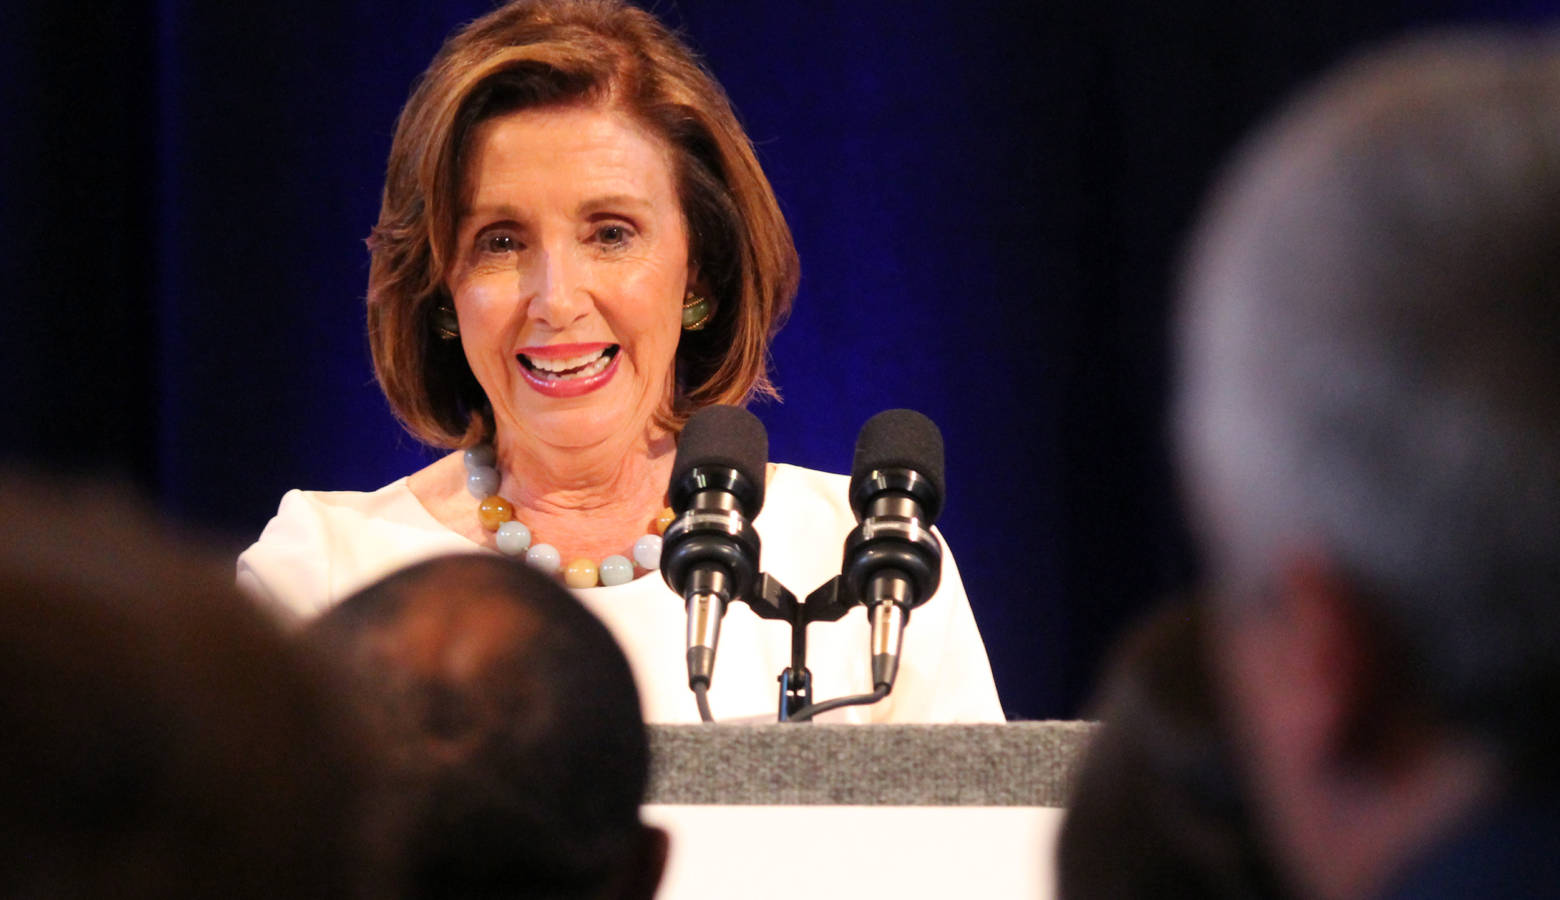 House Speaker Nancy Pelosi (D-Calif.) speaks at the Young Democrats National Convention in Indianapolis on Friday July 19. Pelosi smiles as the crowd begins chanting "Nancy." (Lauren Chapman/IPB News)